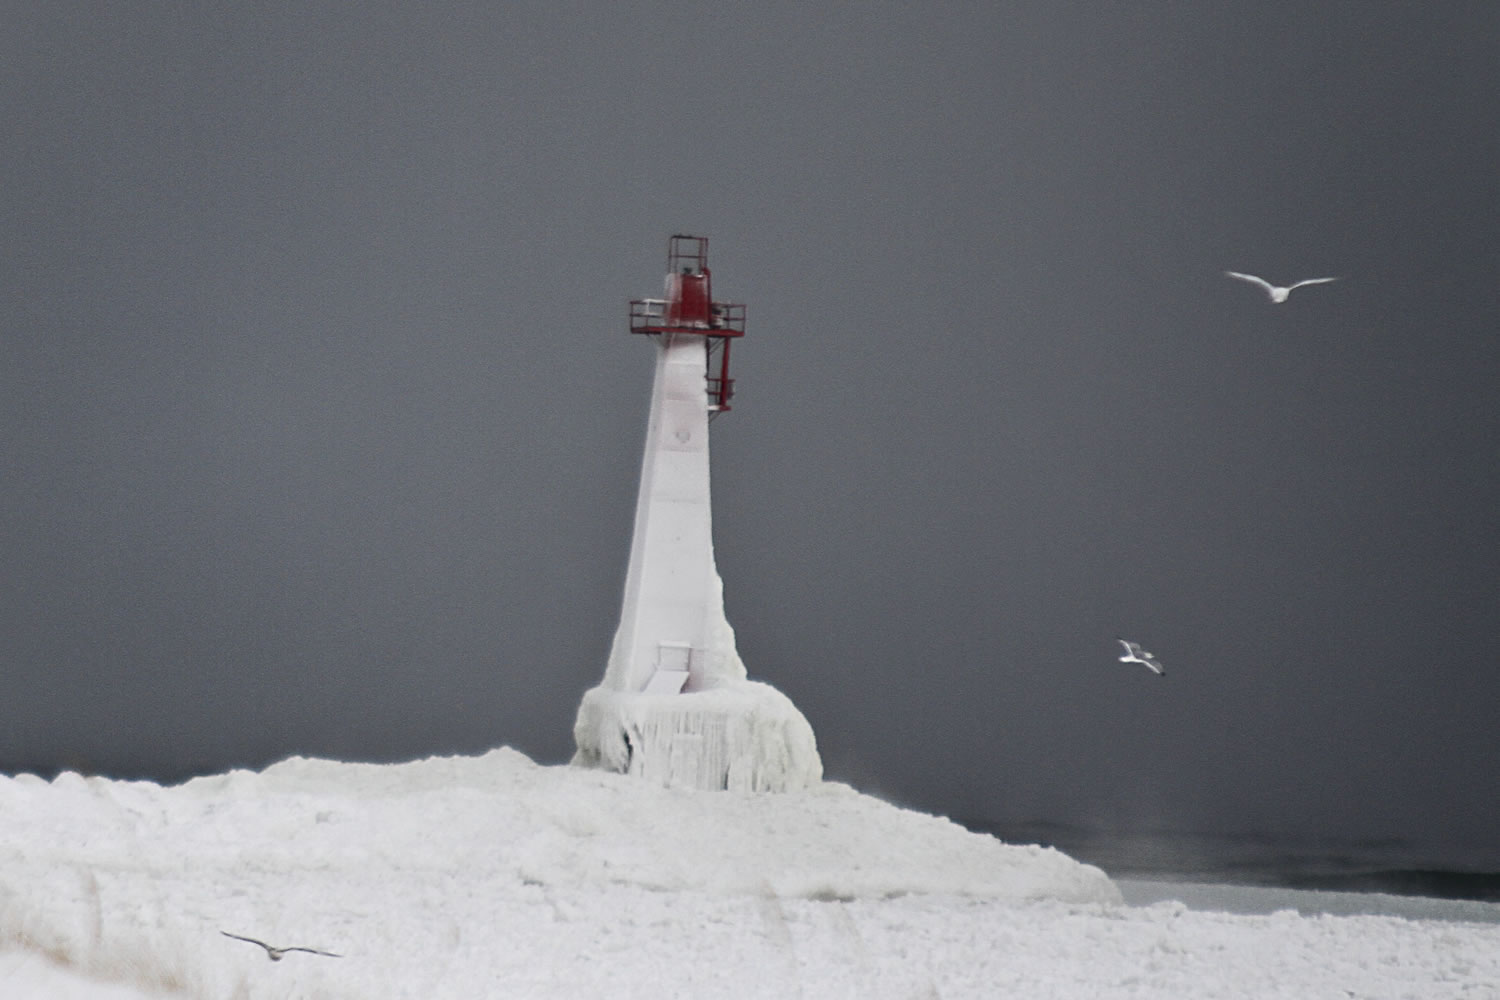 The lighthouse at Pere Marquette Beach is completely frozen after a severe winter storm hit Tuesday in Muskegon, Mich.